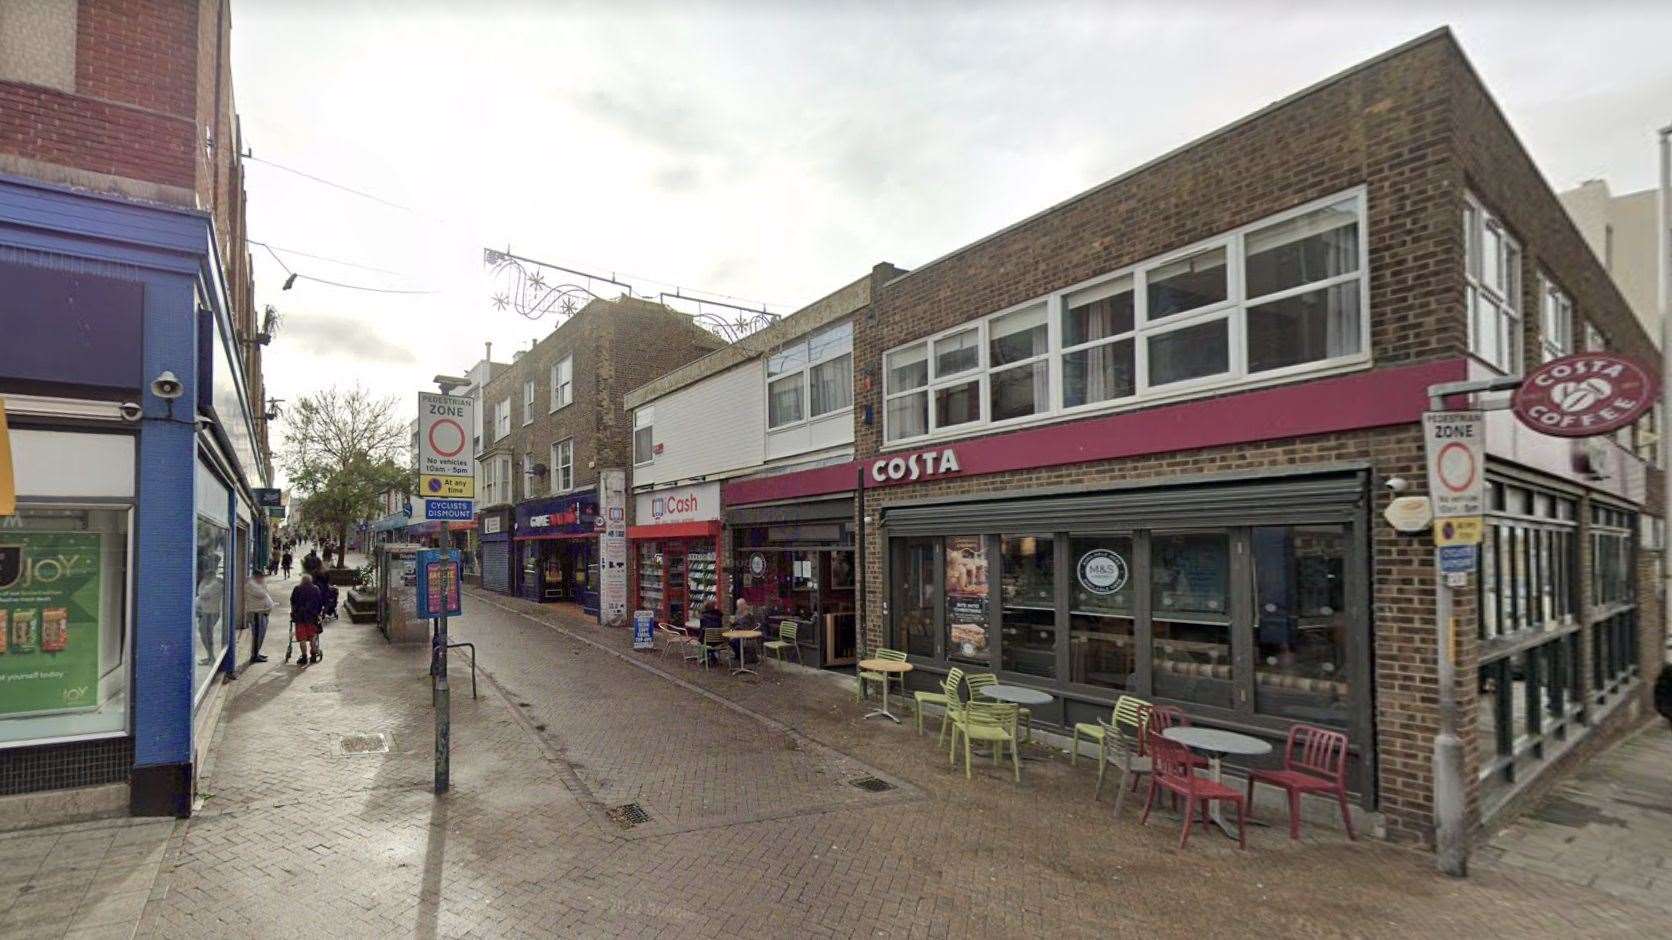 The assault happened in Margate high street. Picture: Google